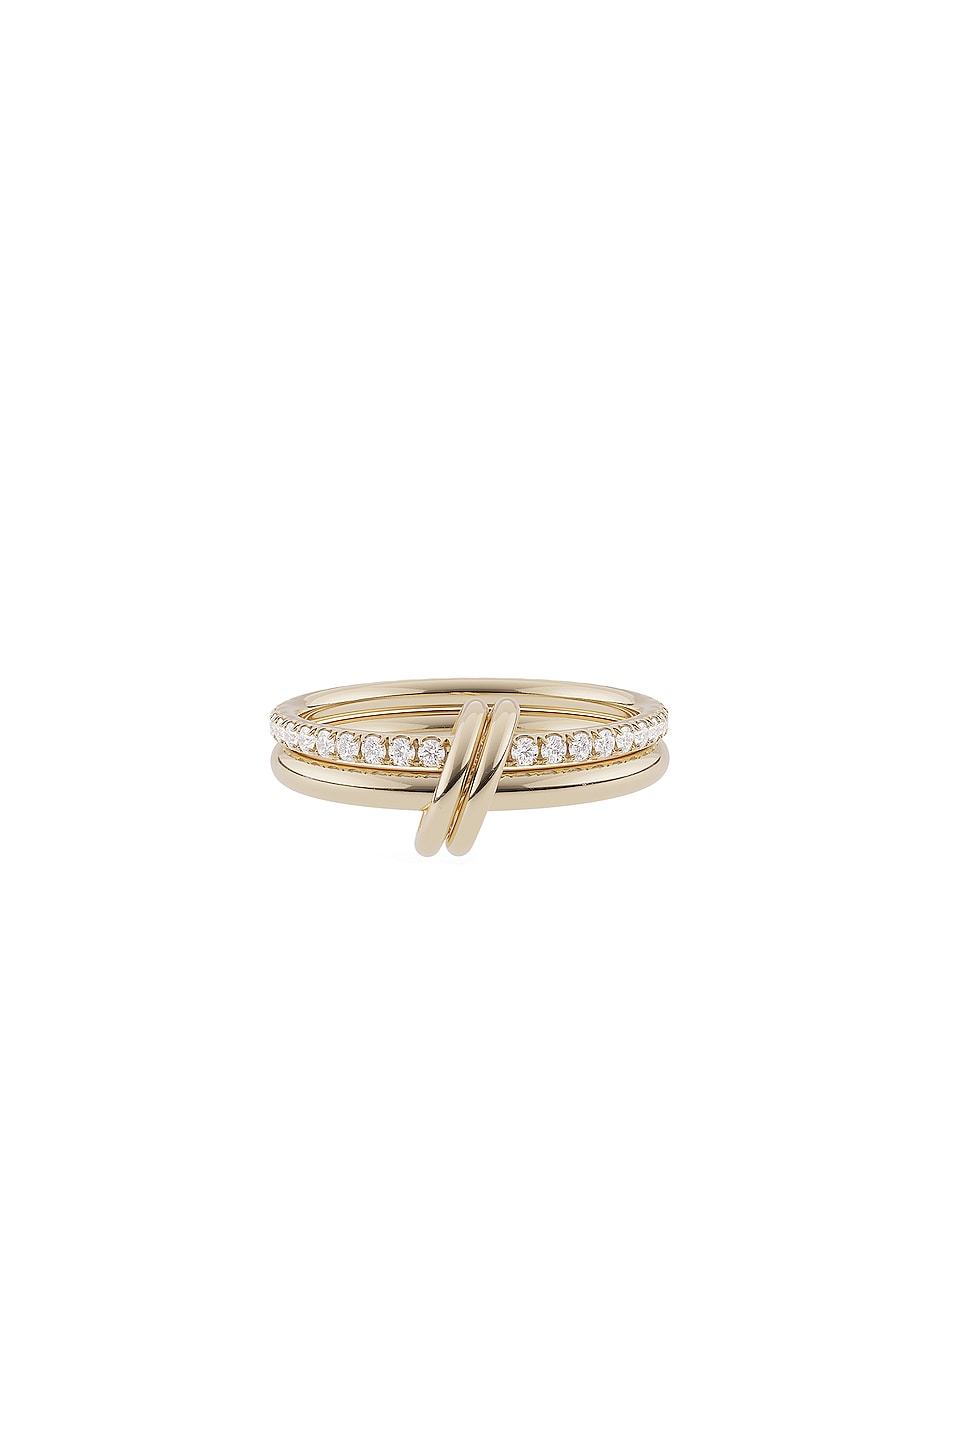 Image 1 of Spinelli Kilcollin Ceres Deux Ring in 18K Yellow Gold & White Diamonds